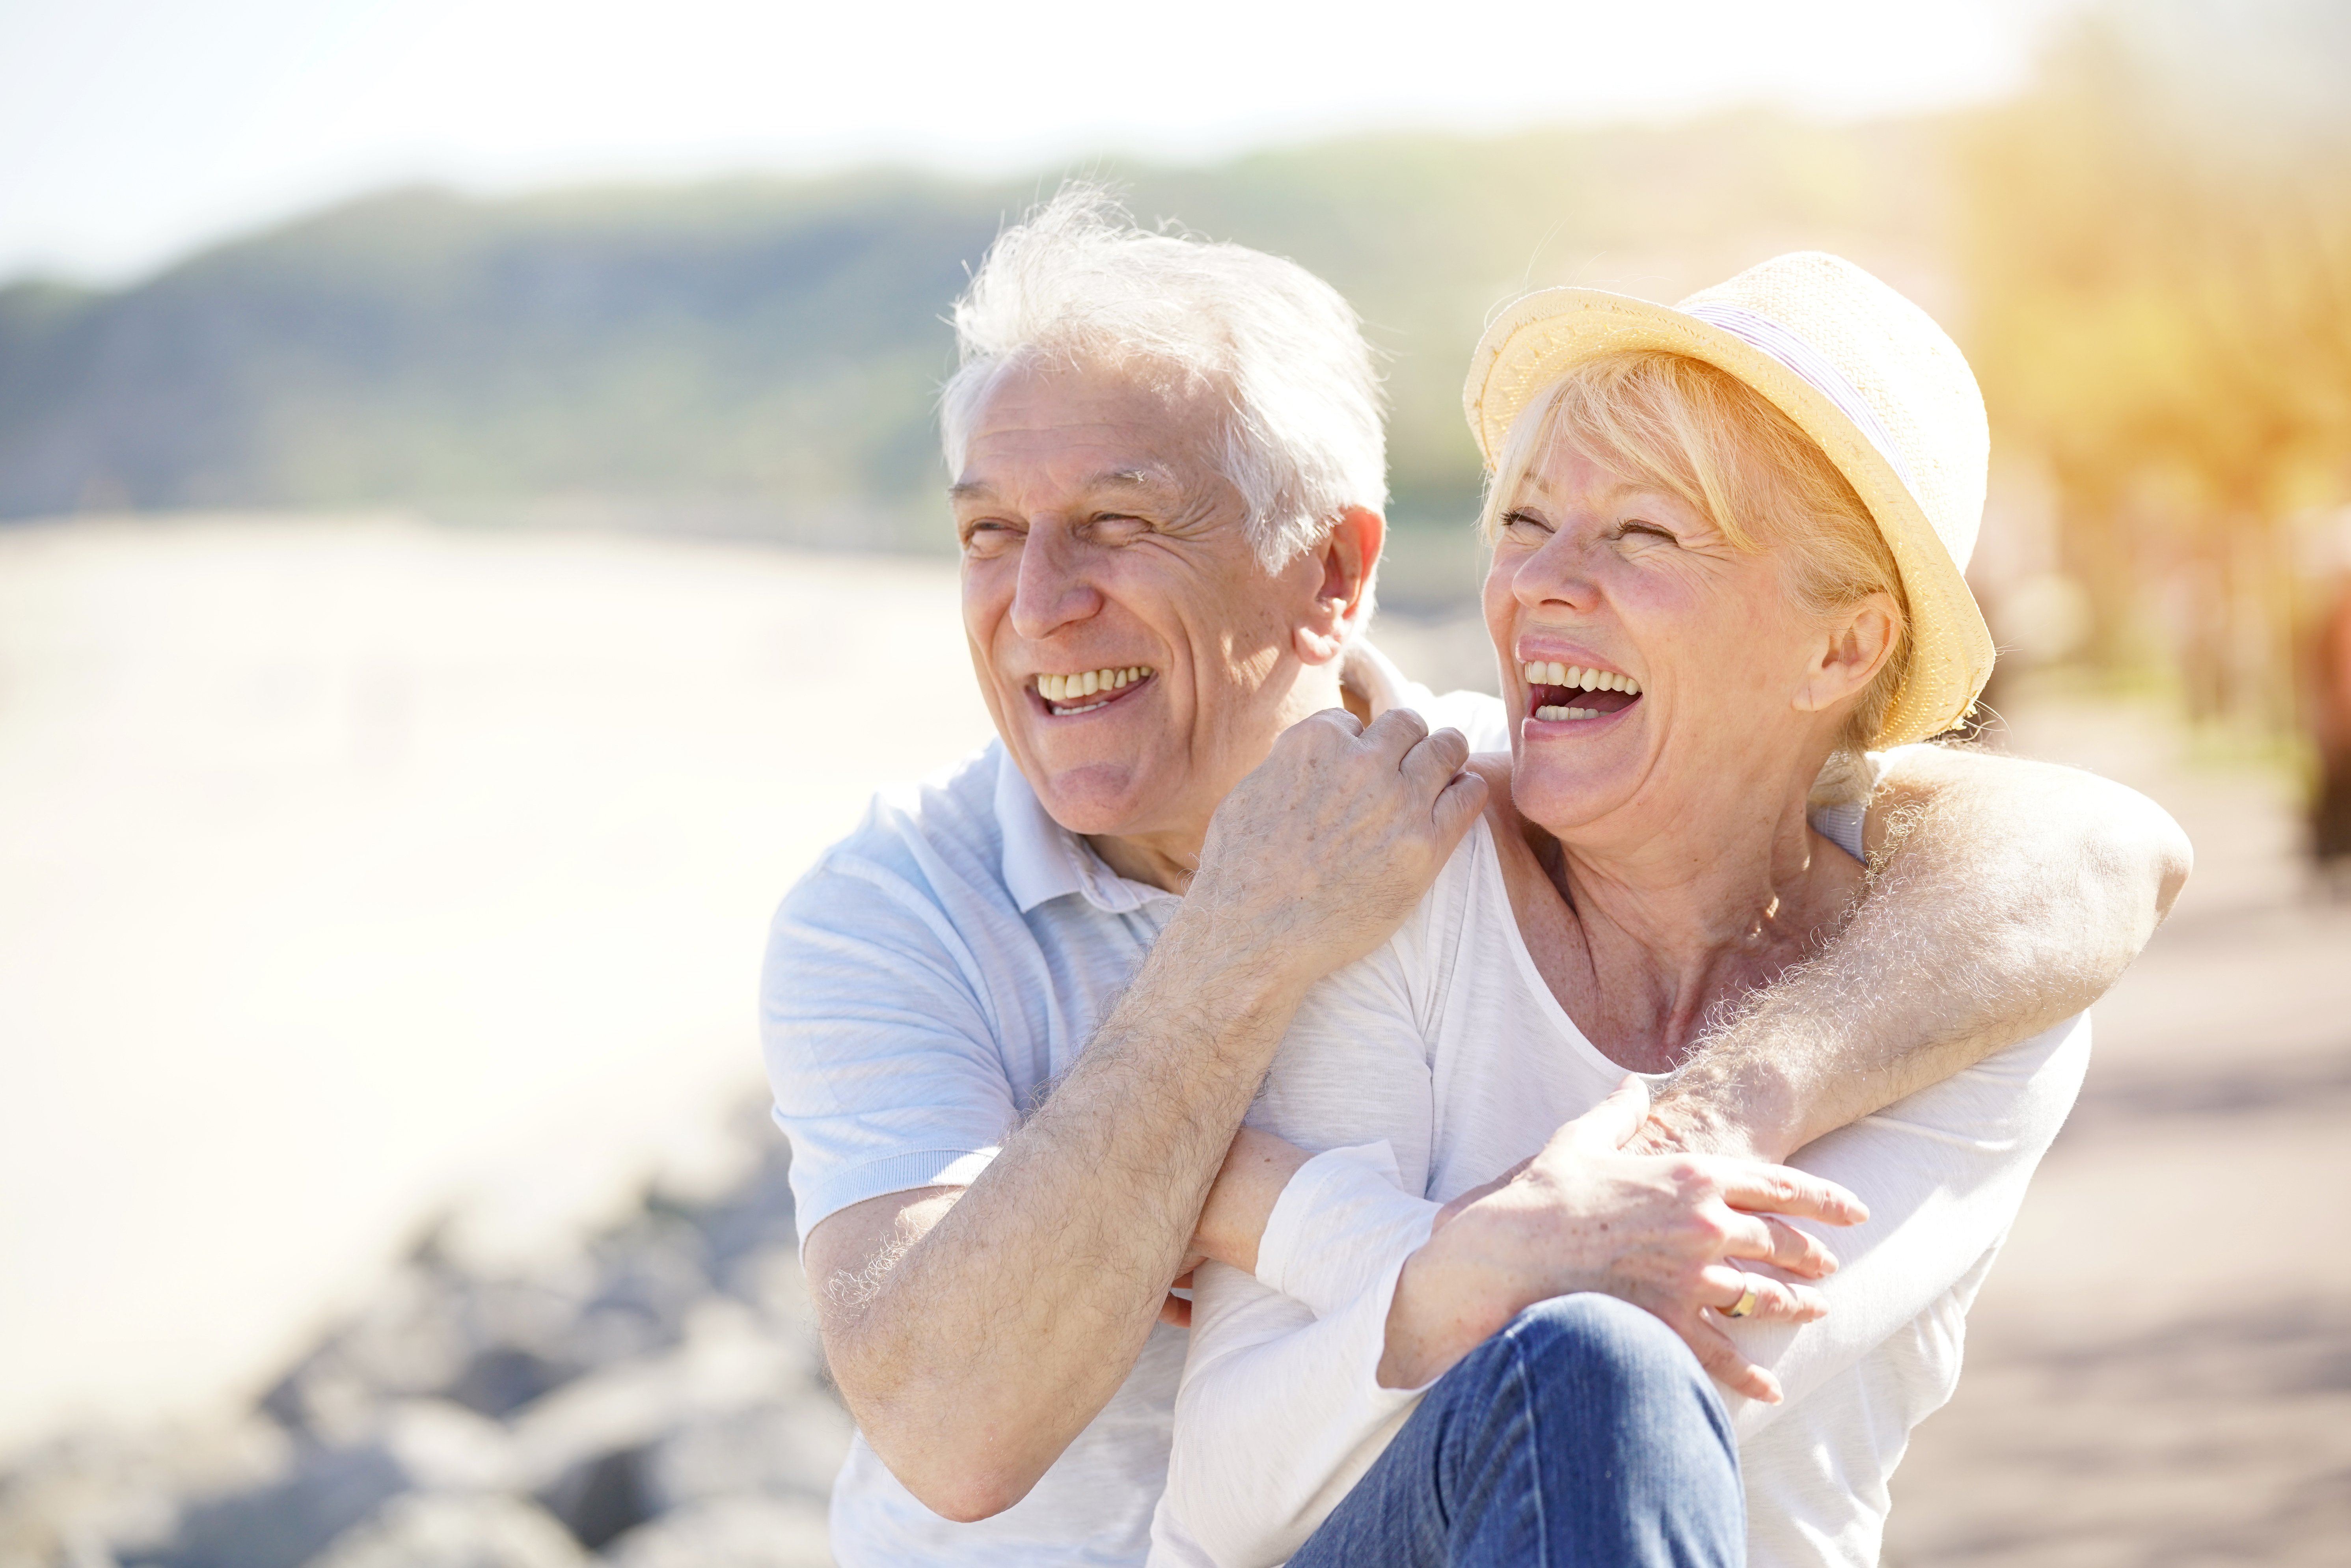 Two older adults laughing on a beach together